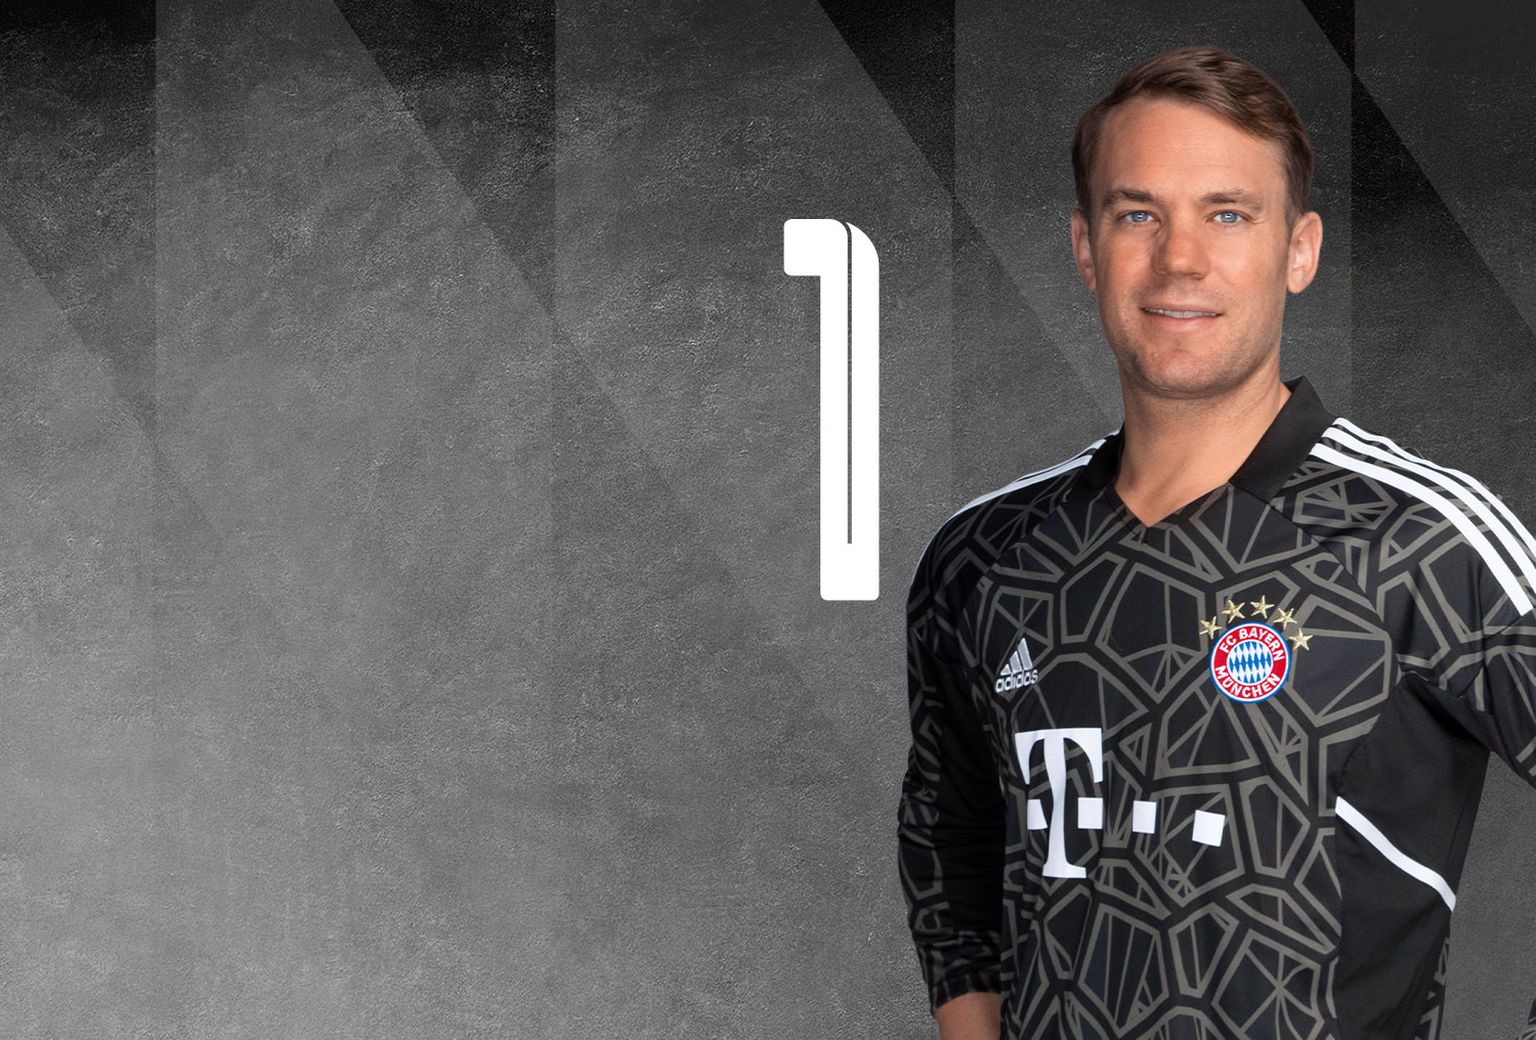 Football Kits Soccer Shirt For Kids Boys Children Youth ATB Germany Neuer Jersey Goalkeeper #1 Home 18/19 